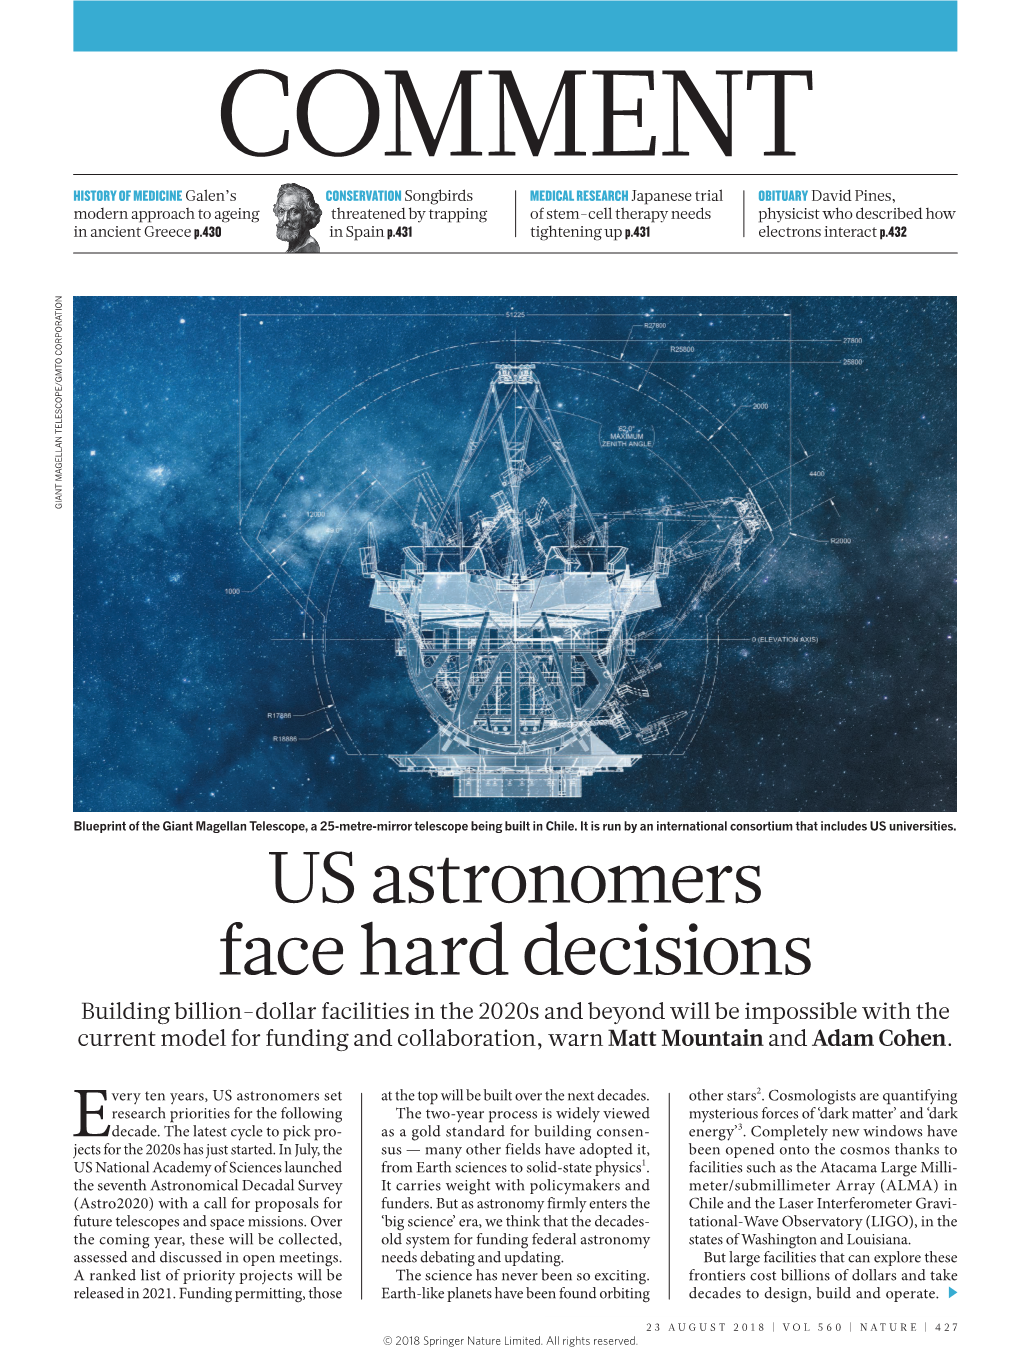 US Astronomers Face Hard Decisions